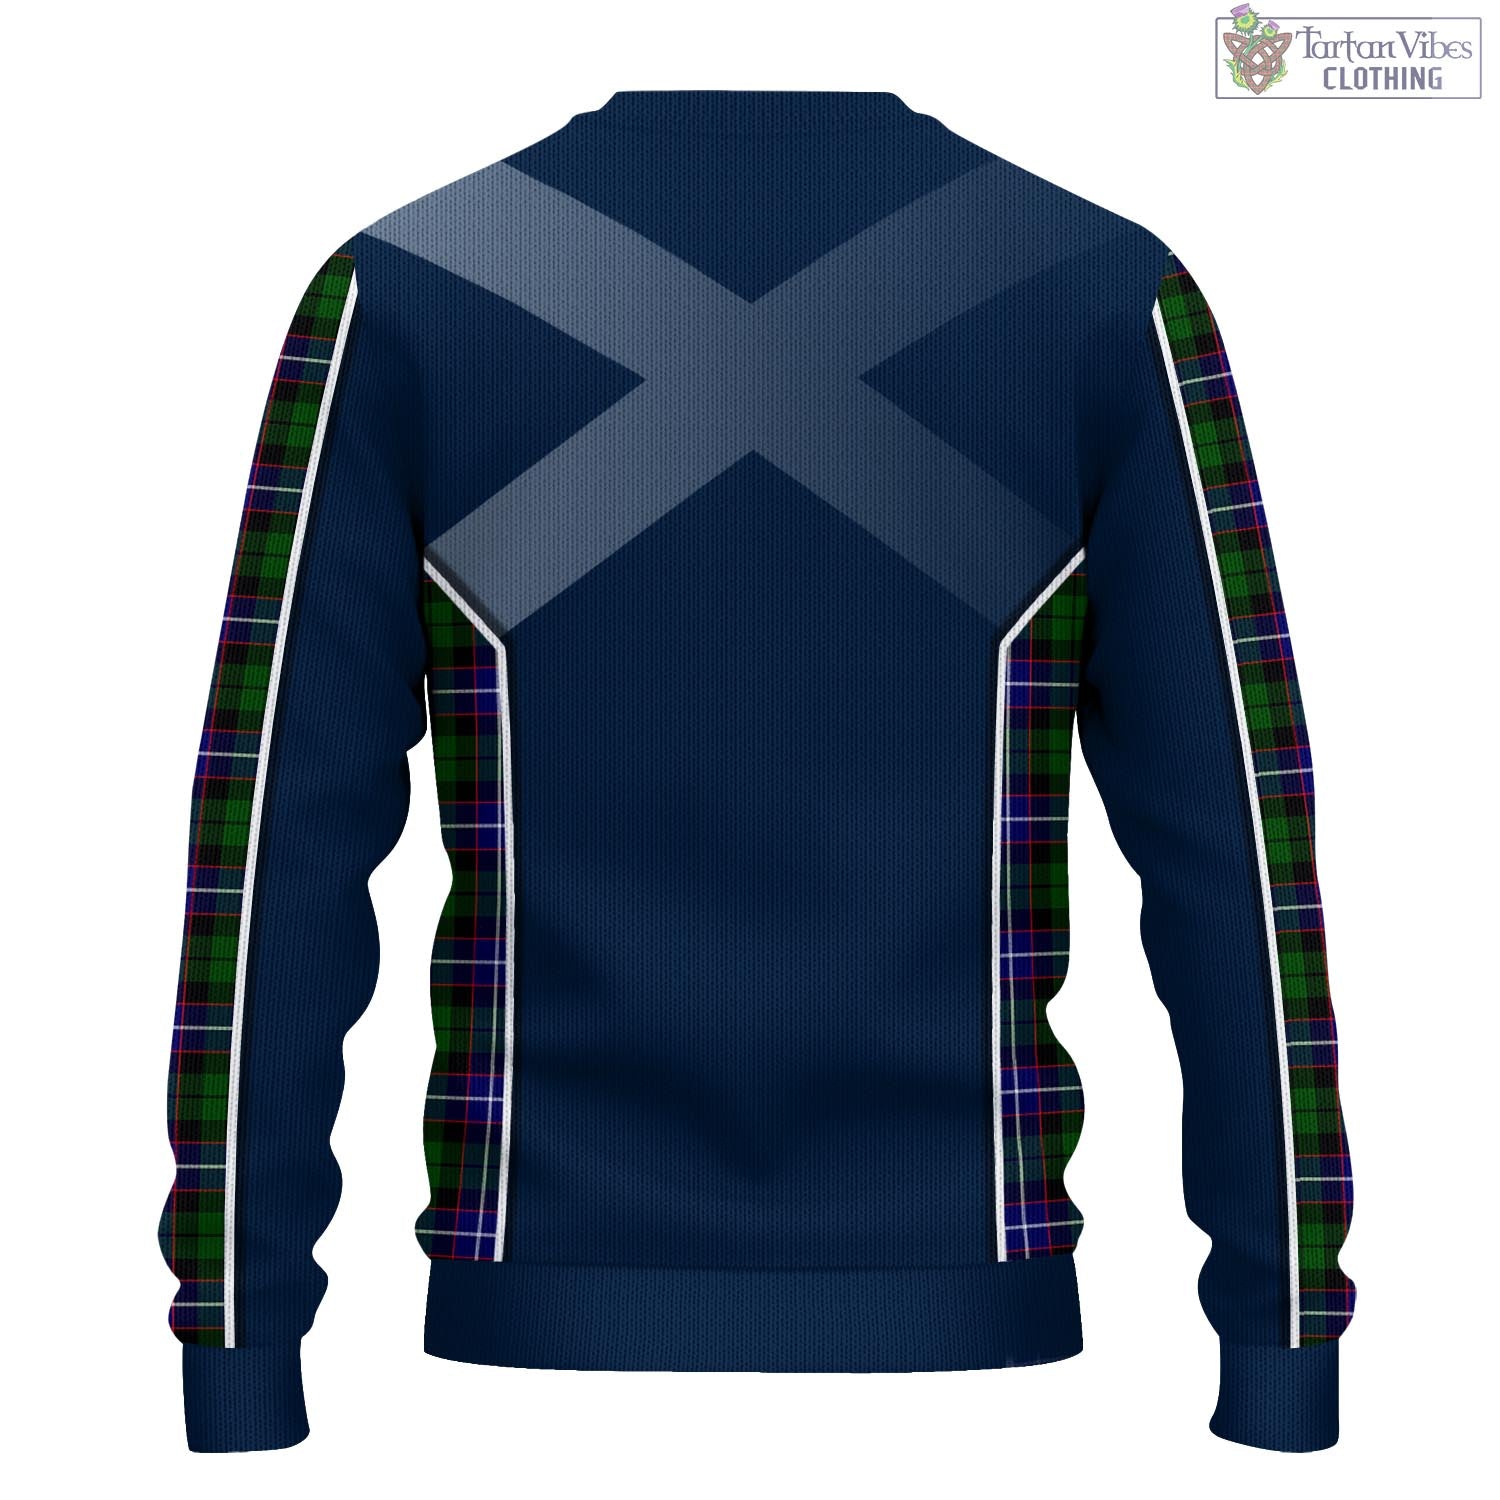 Tartan Vibes Clothing Russell Modern Tartan Knitted Sweatshirt with Family Crest and Scottish Thistle Vibes Sport Style